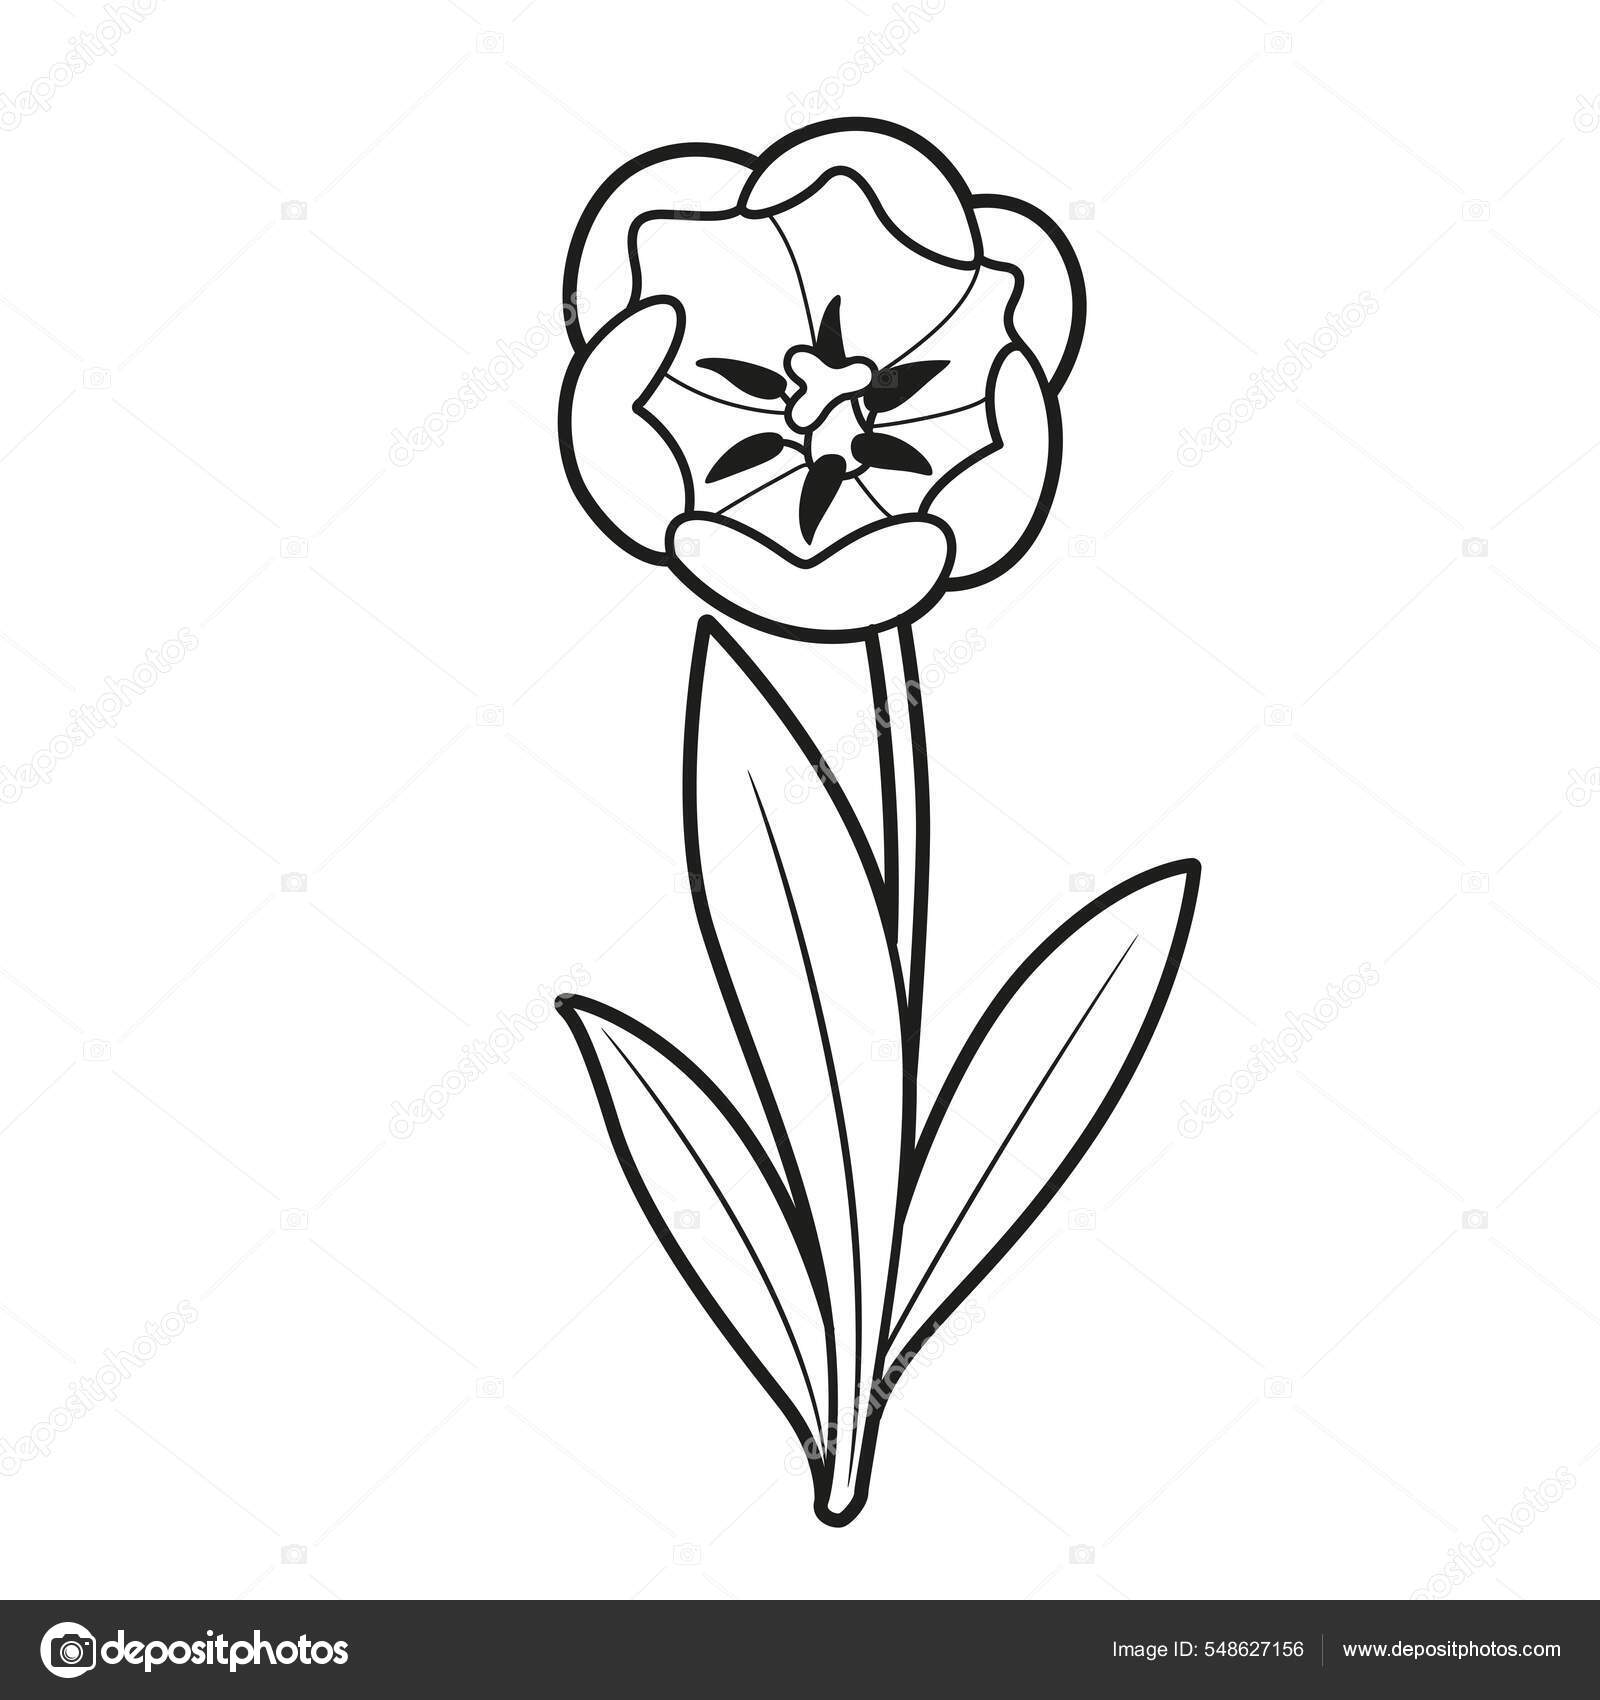 Tulip blossoming big flower coloring book linear drawing isolated white stock vector by yadviga